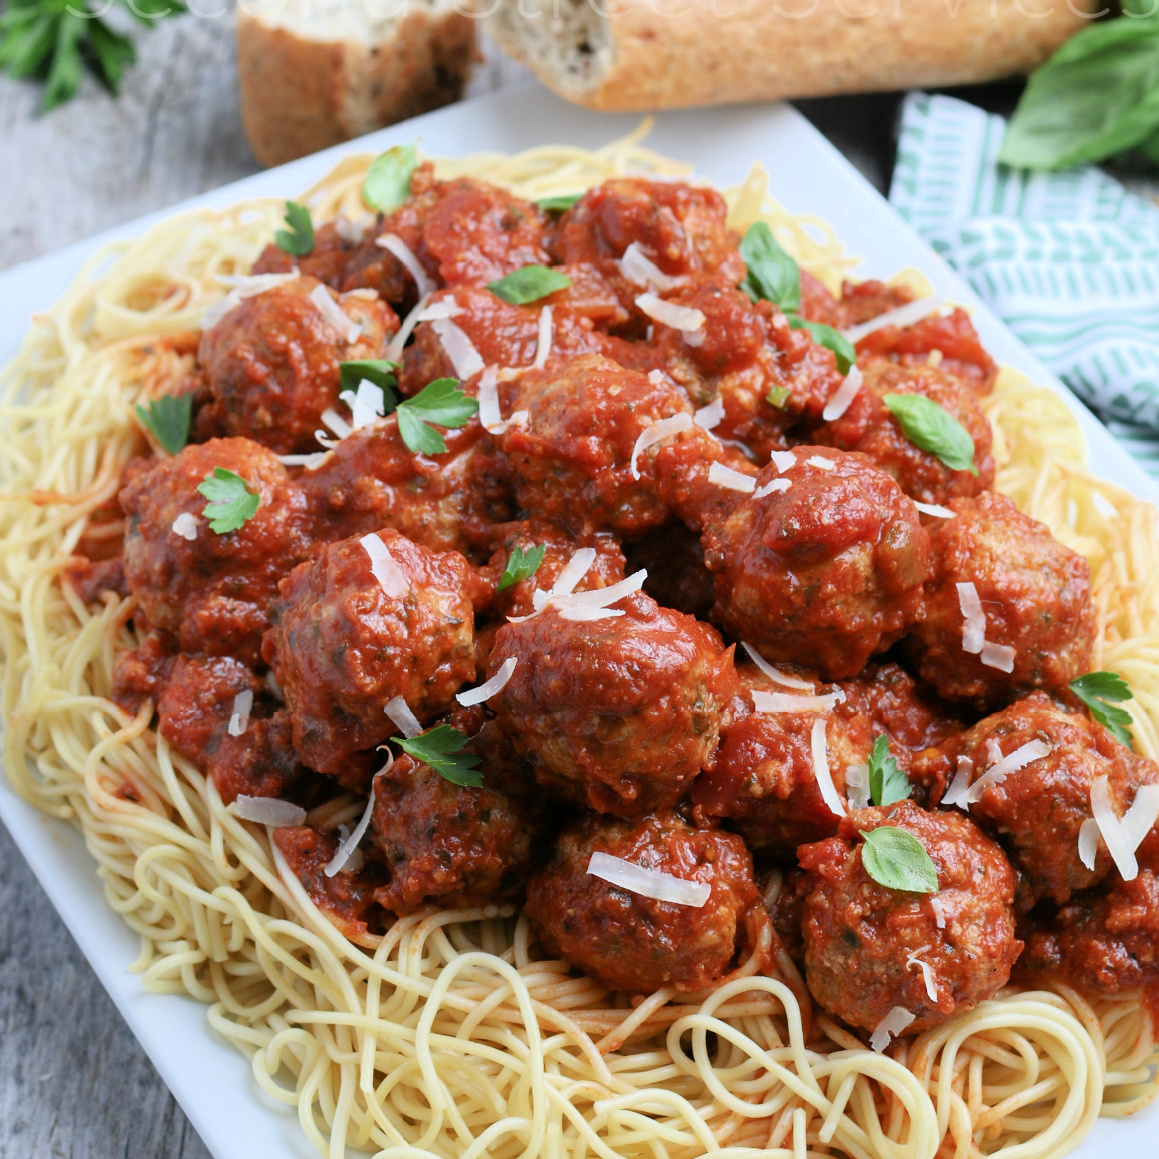 A big plate of spaghetti and baked meatballs with sauce